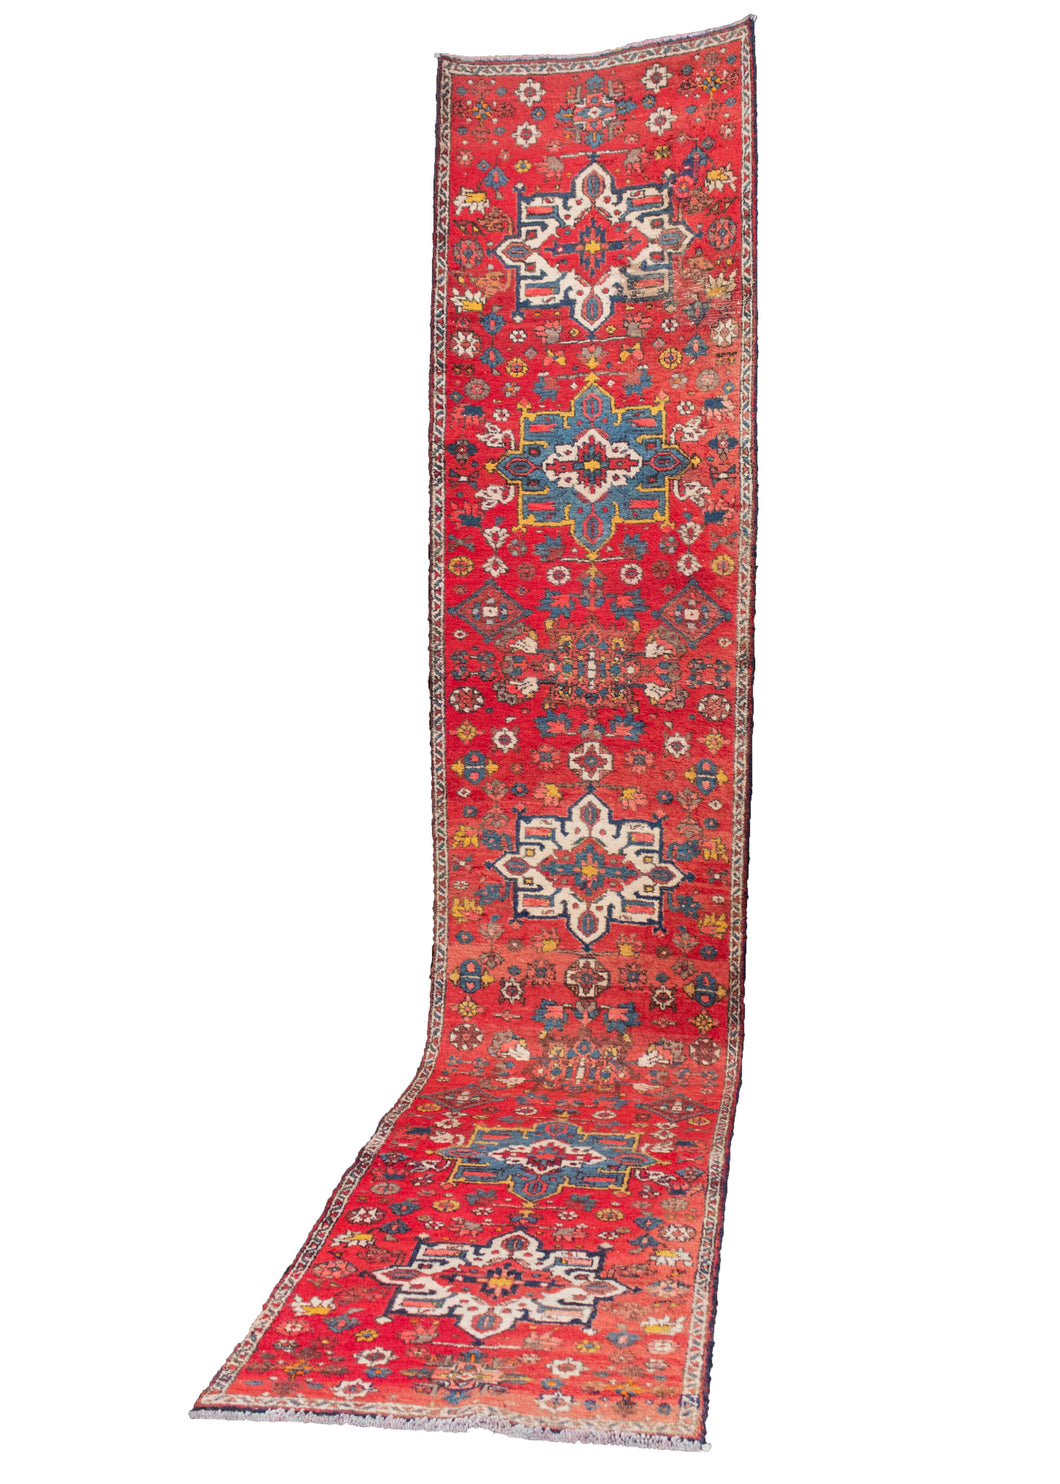 Mid-century Karaja rug with medallion design on a bright red field. Accent colors are blues, ivories, and browns. In good condition, with some moth damage throughout but foundation is still intact.